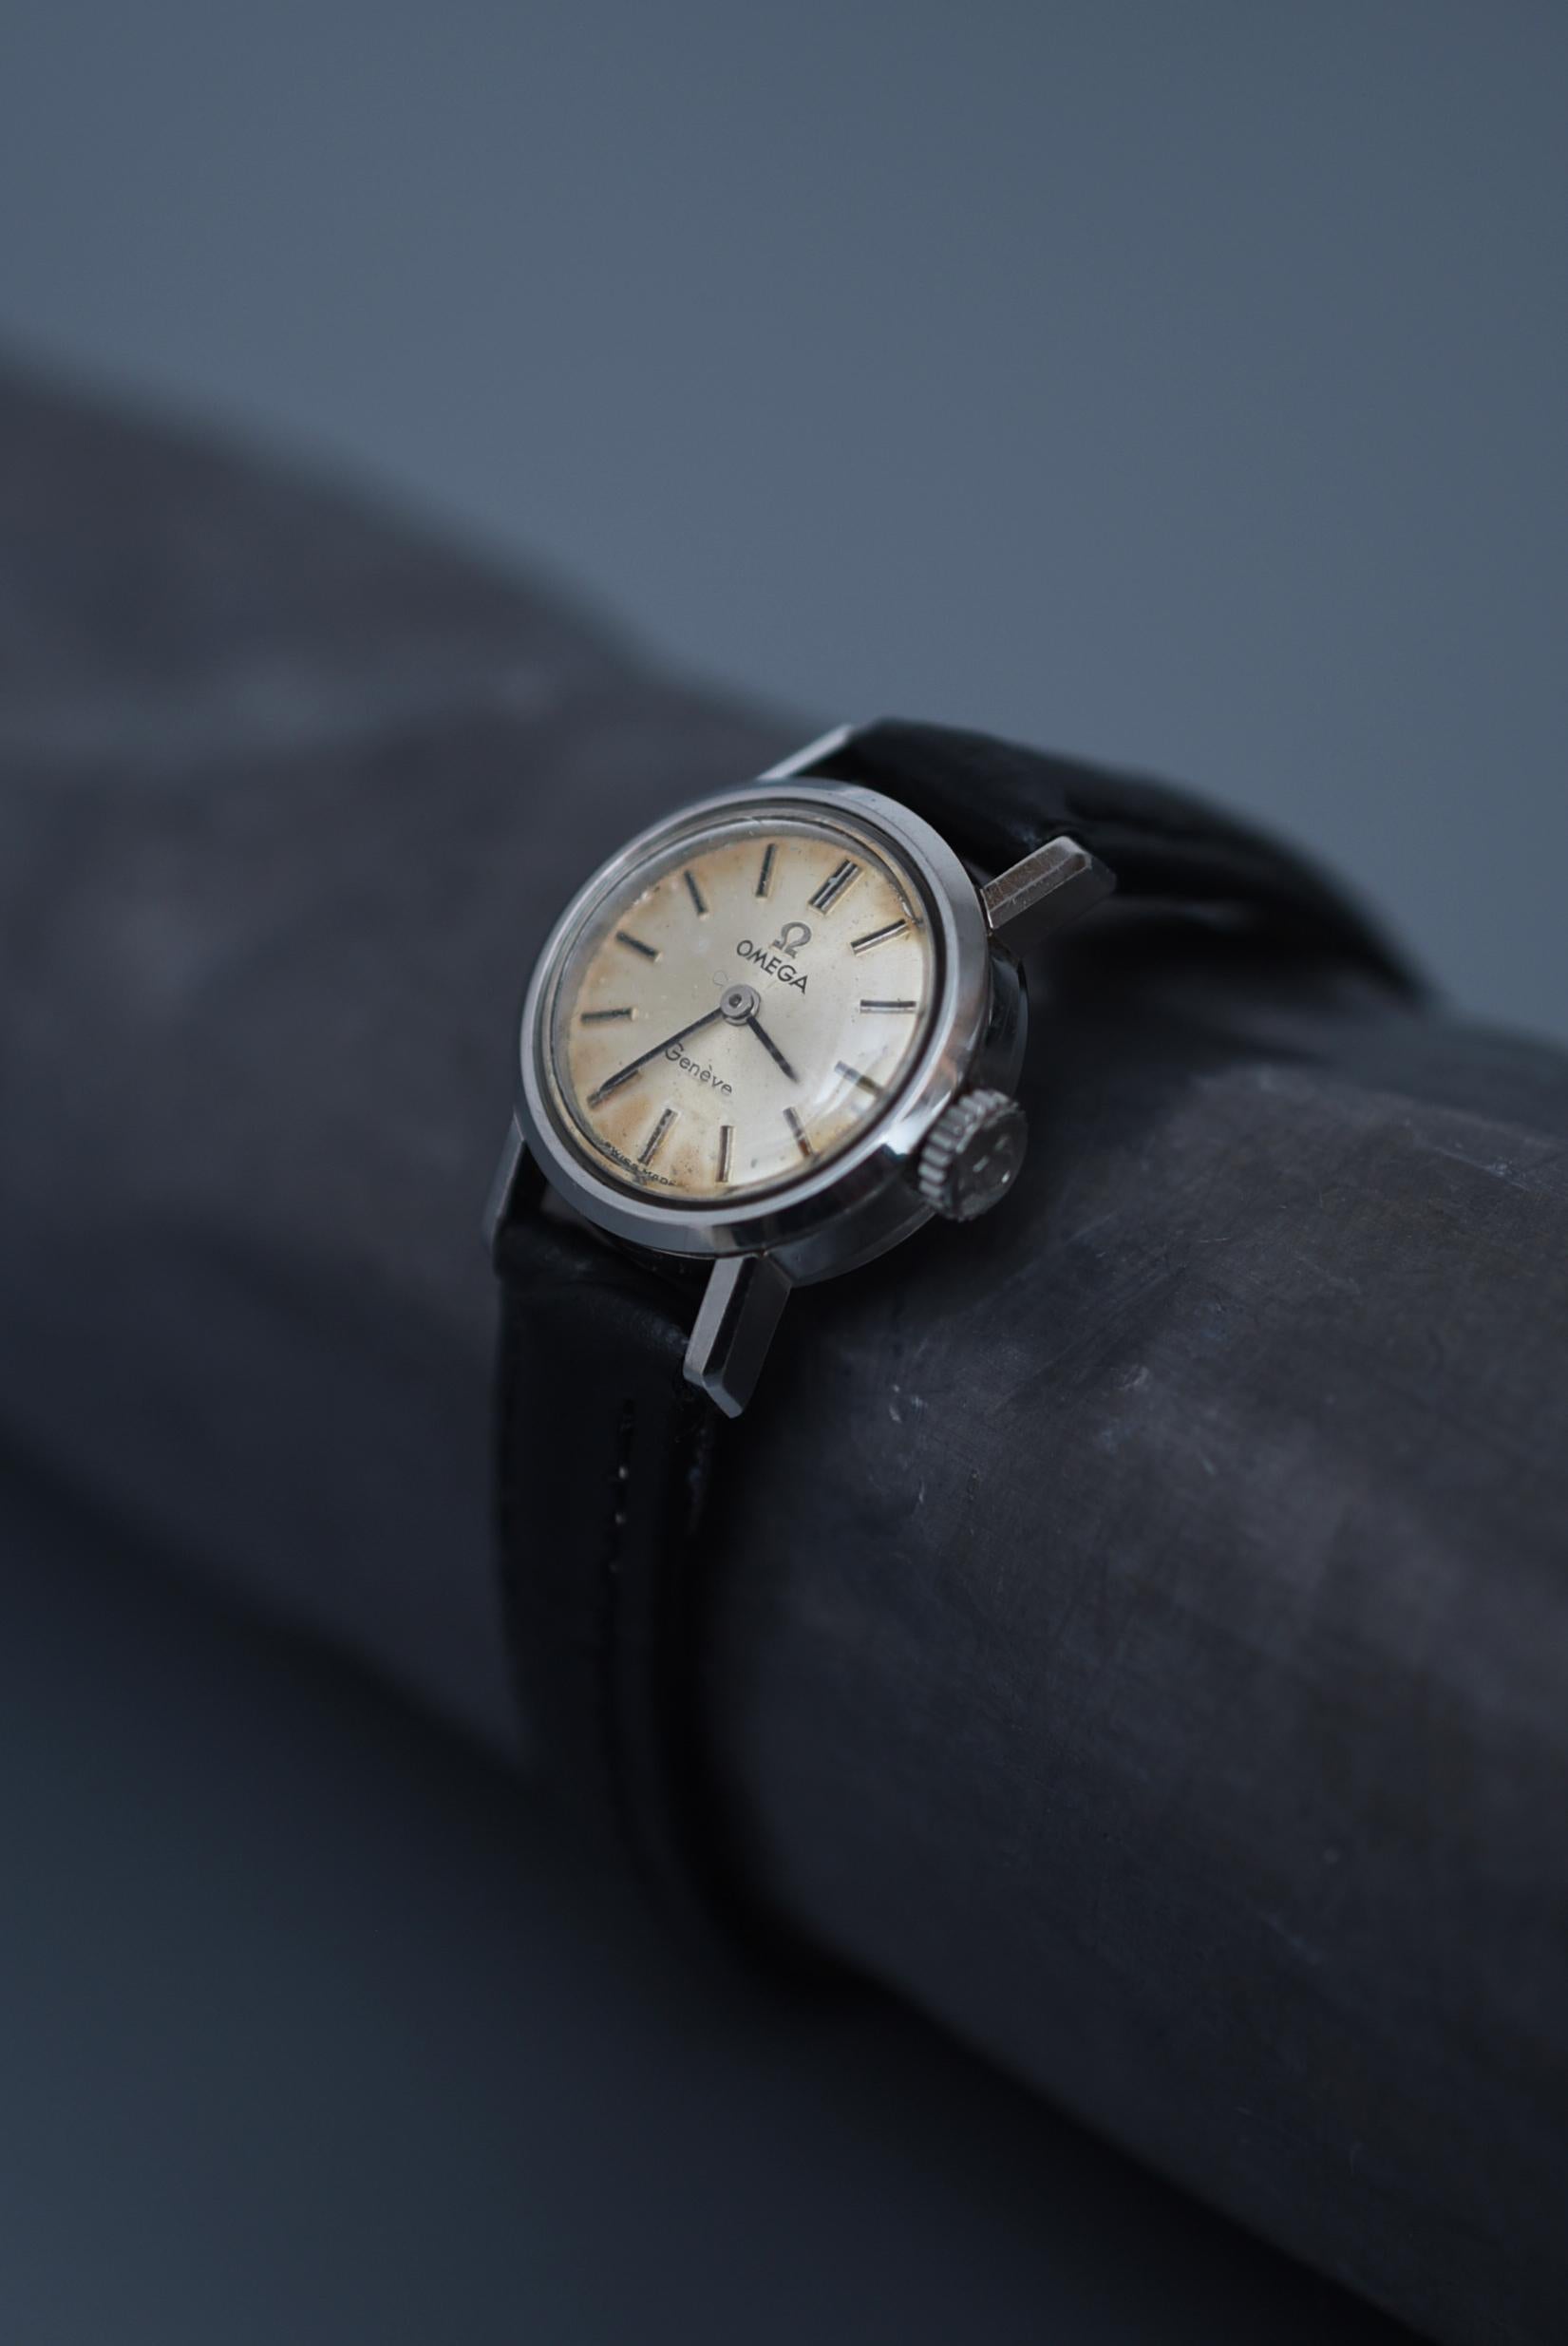 authentic vintage watches artisan